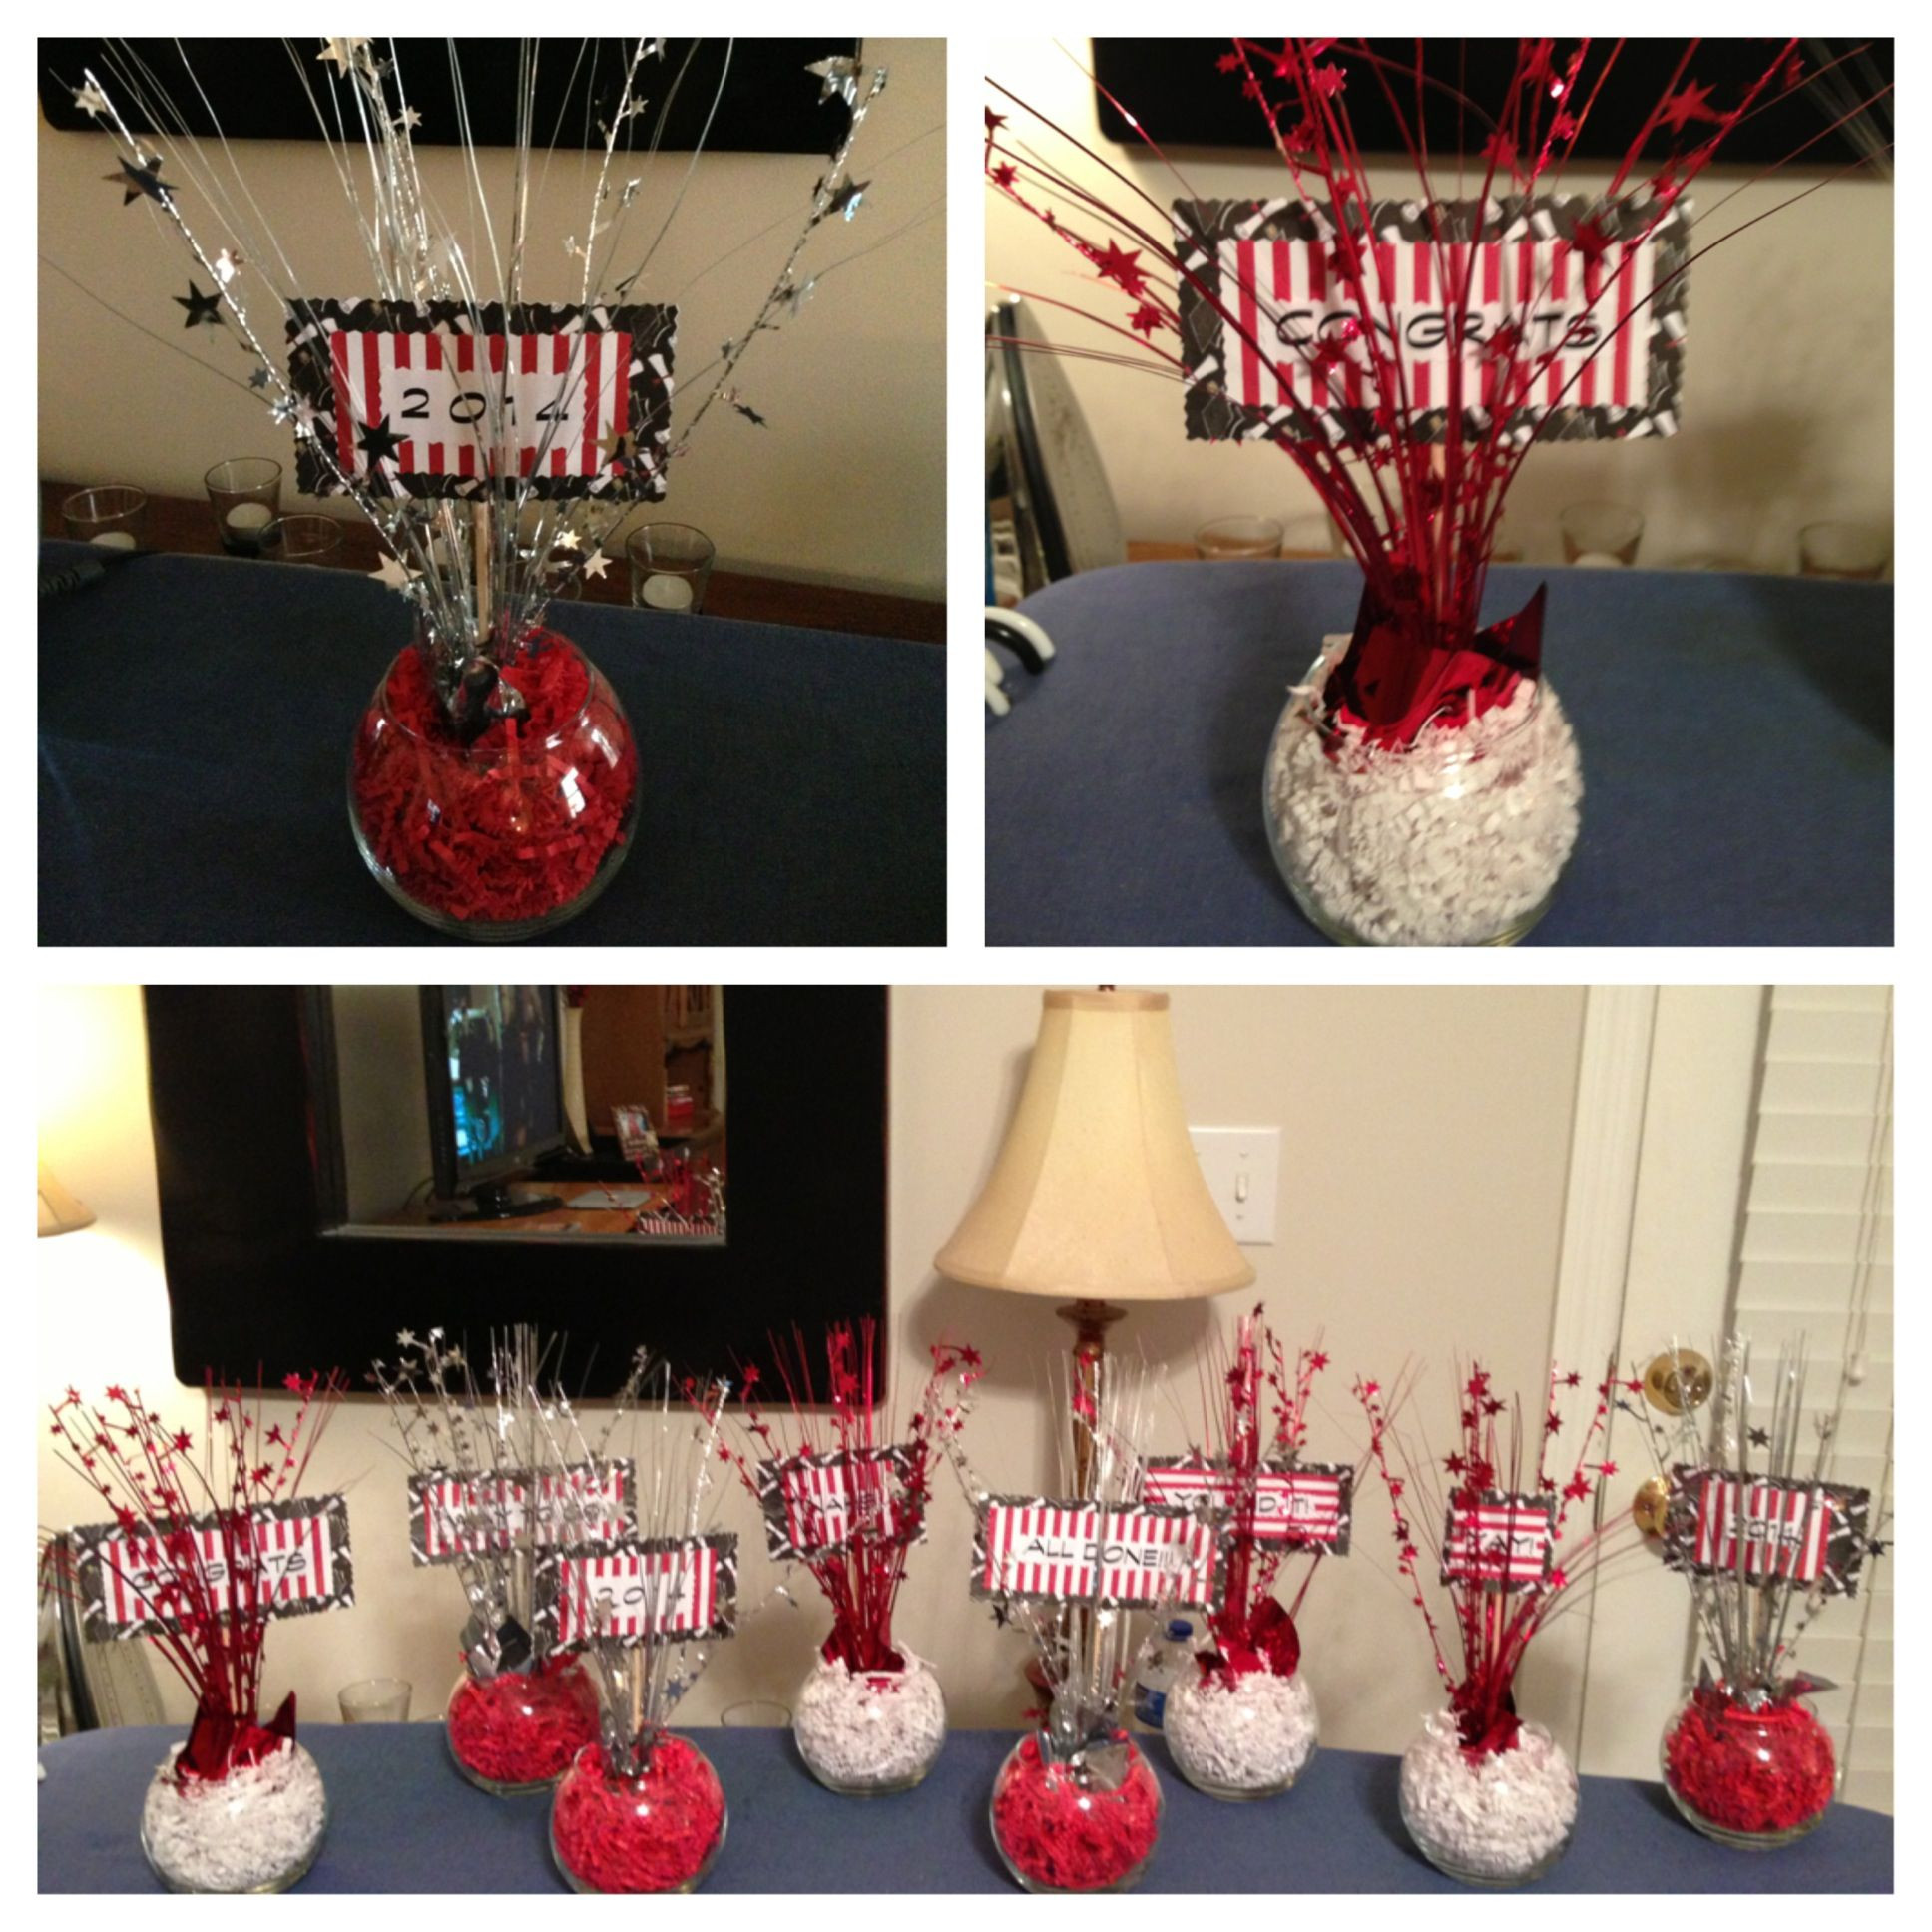 Red And White Graduation Party Ideas
 Graduation centerpieces in black red and white My own